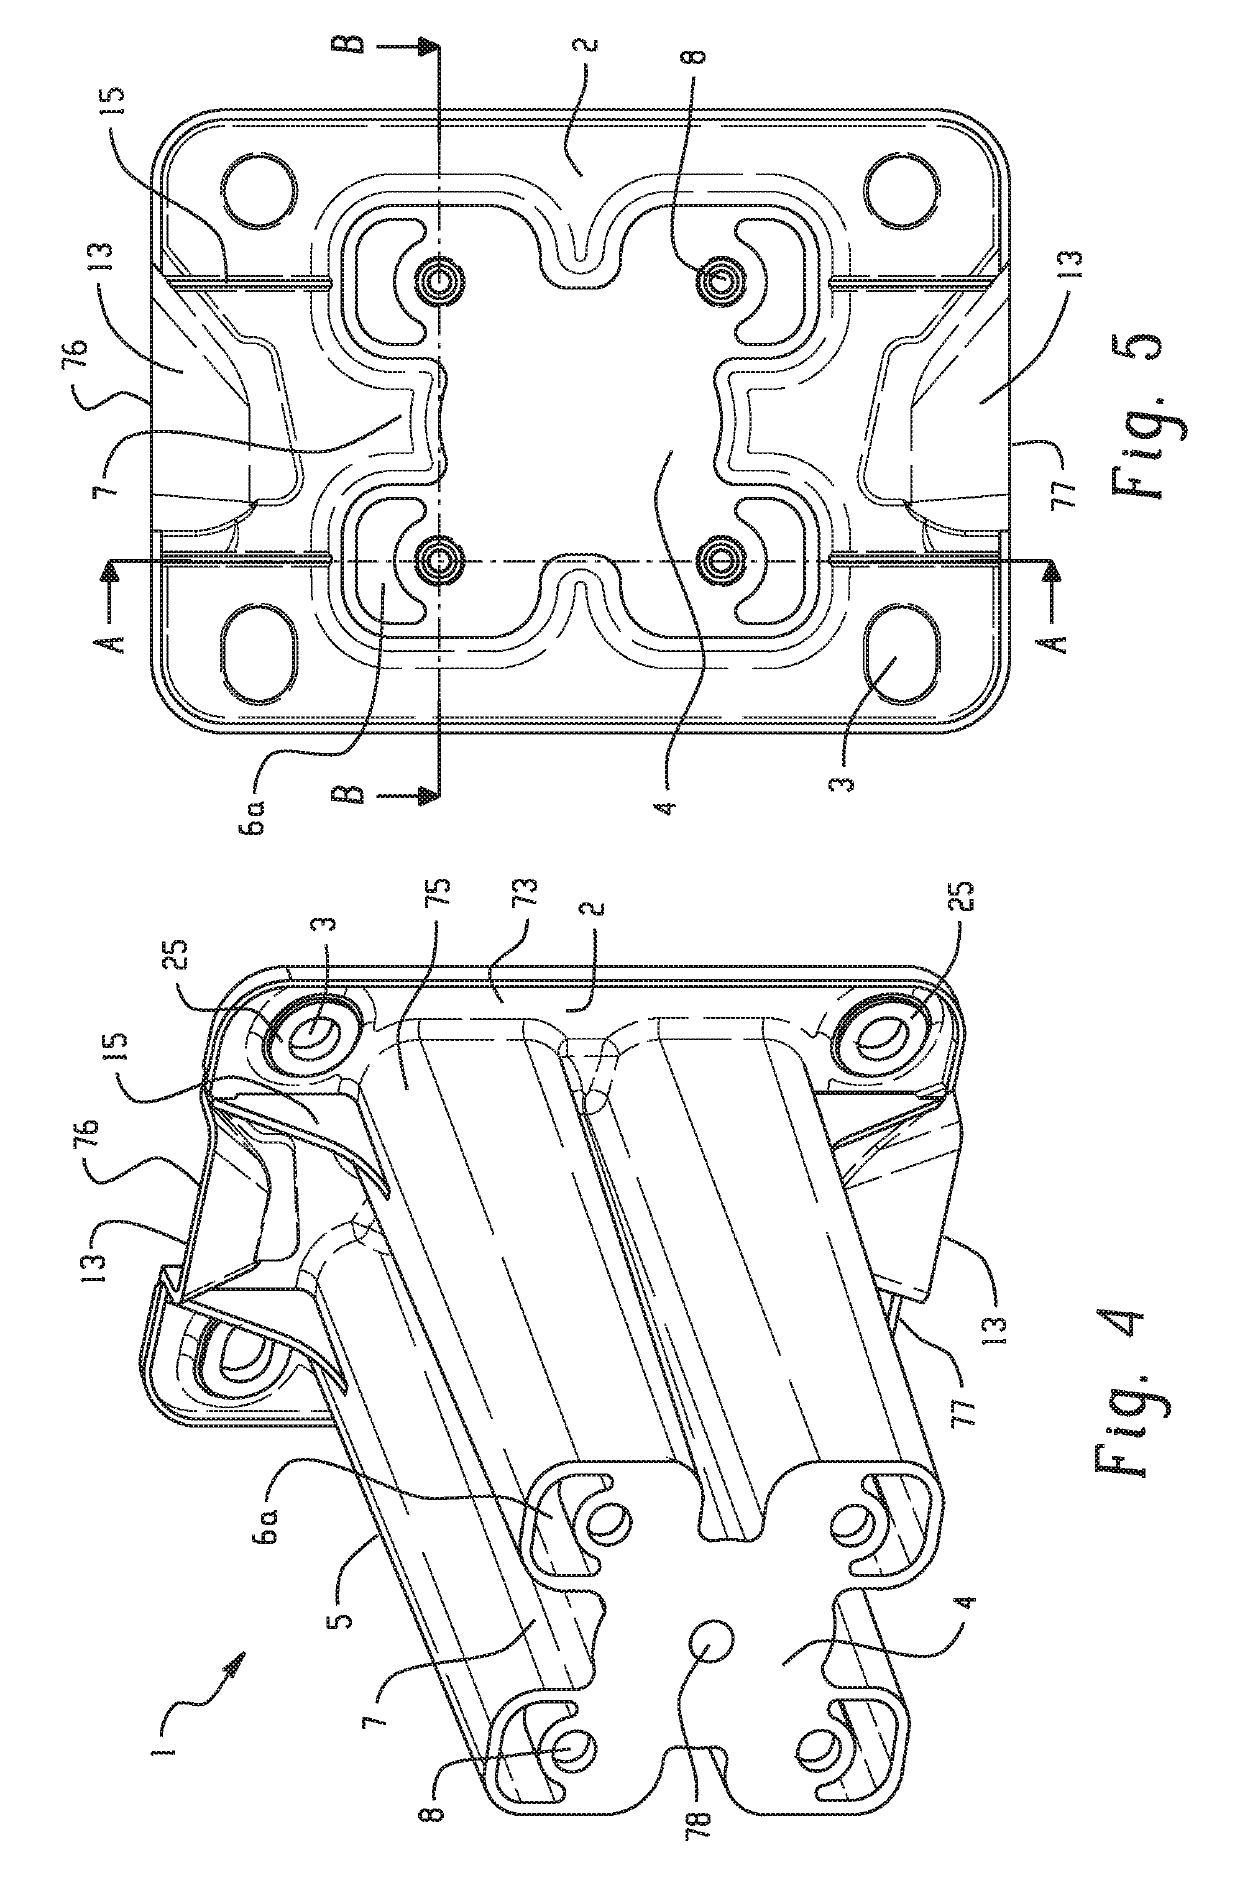 Crushable polymeric rail extension, systems, and methods of making and using the same